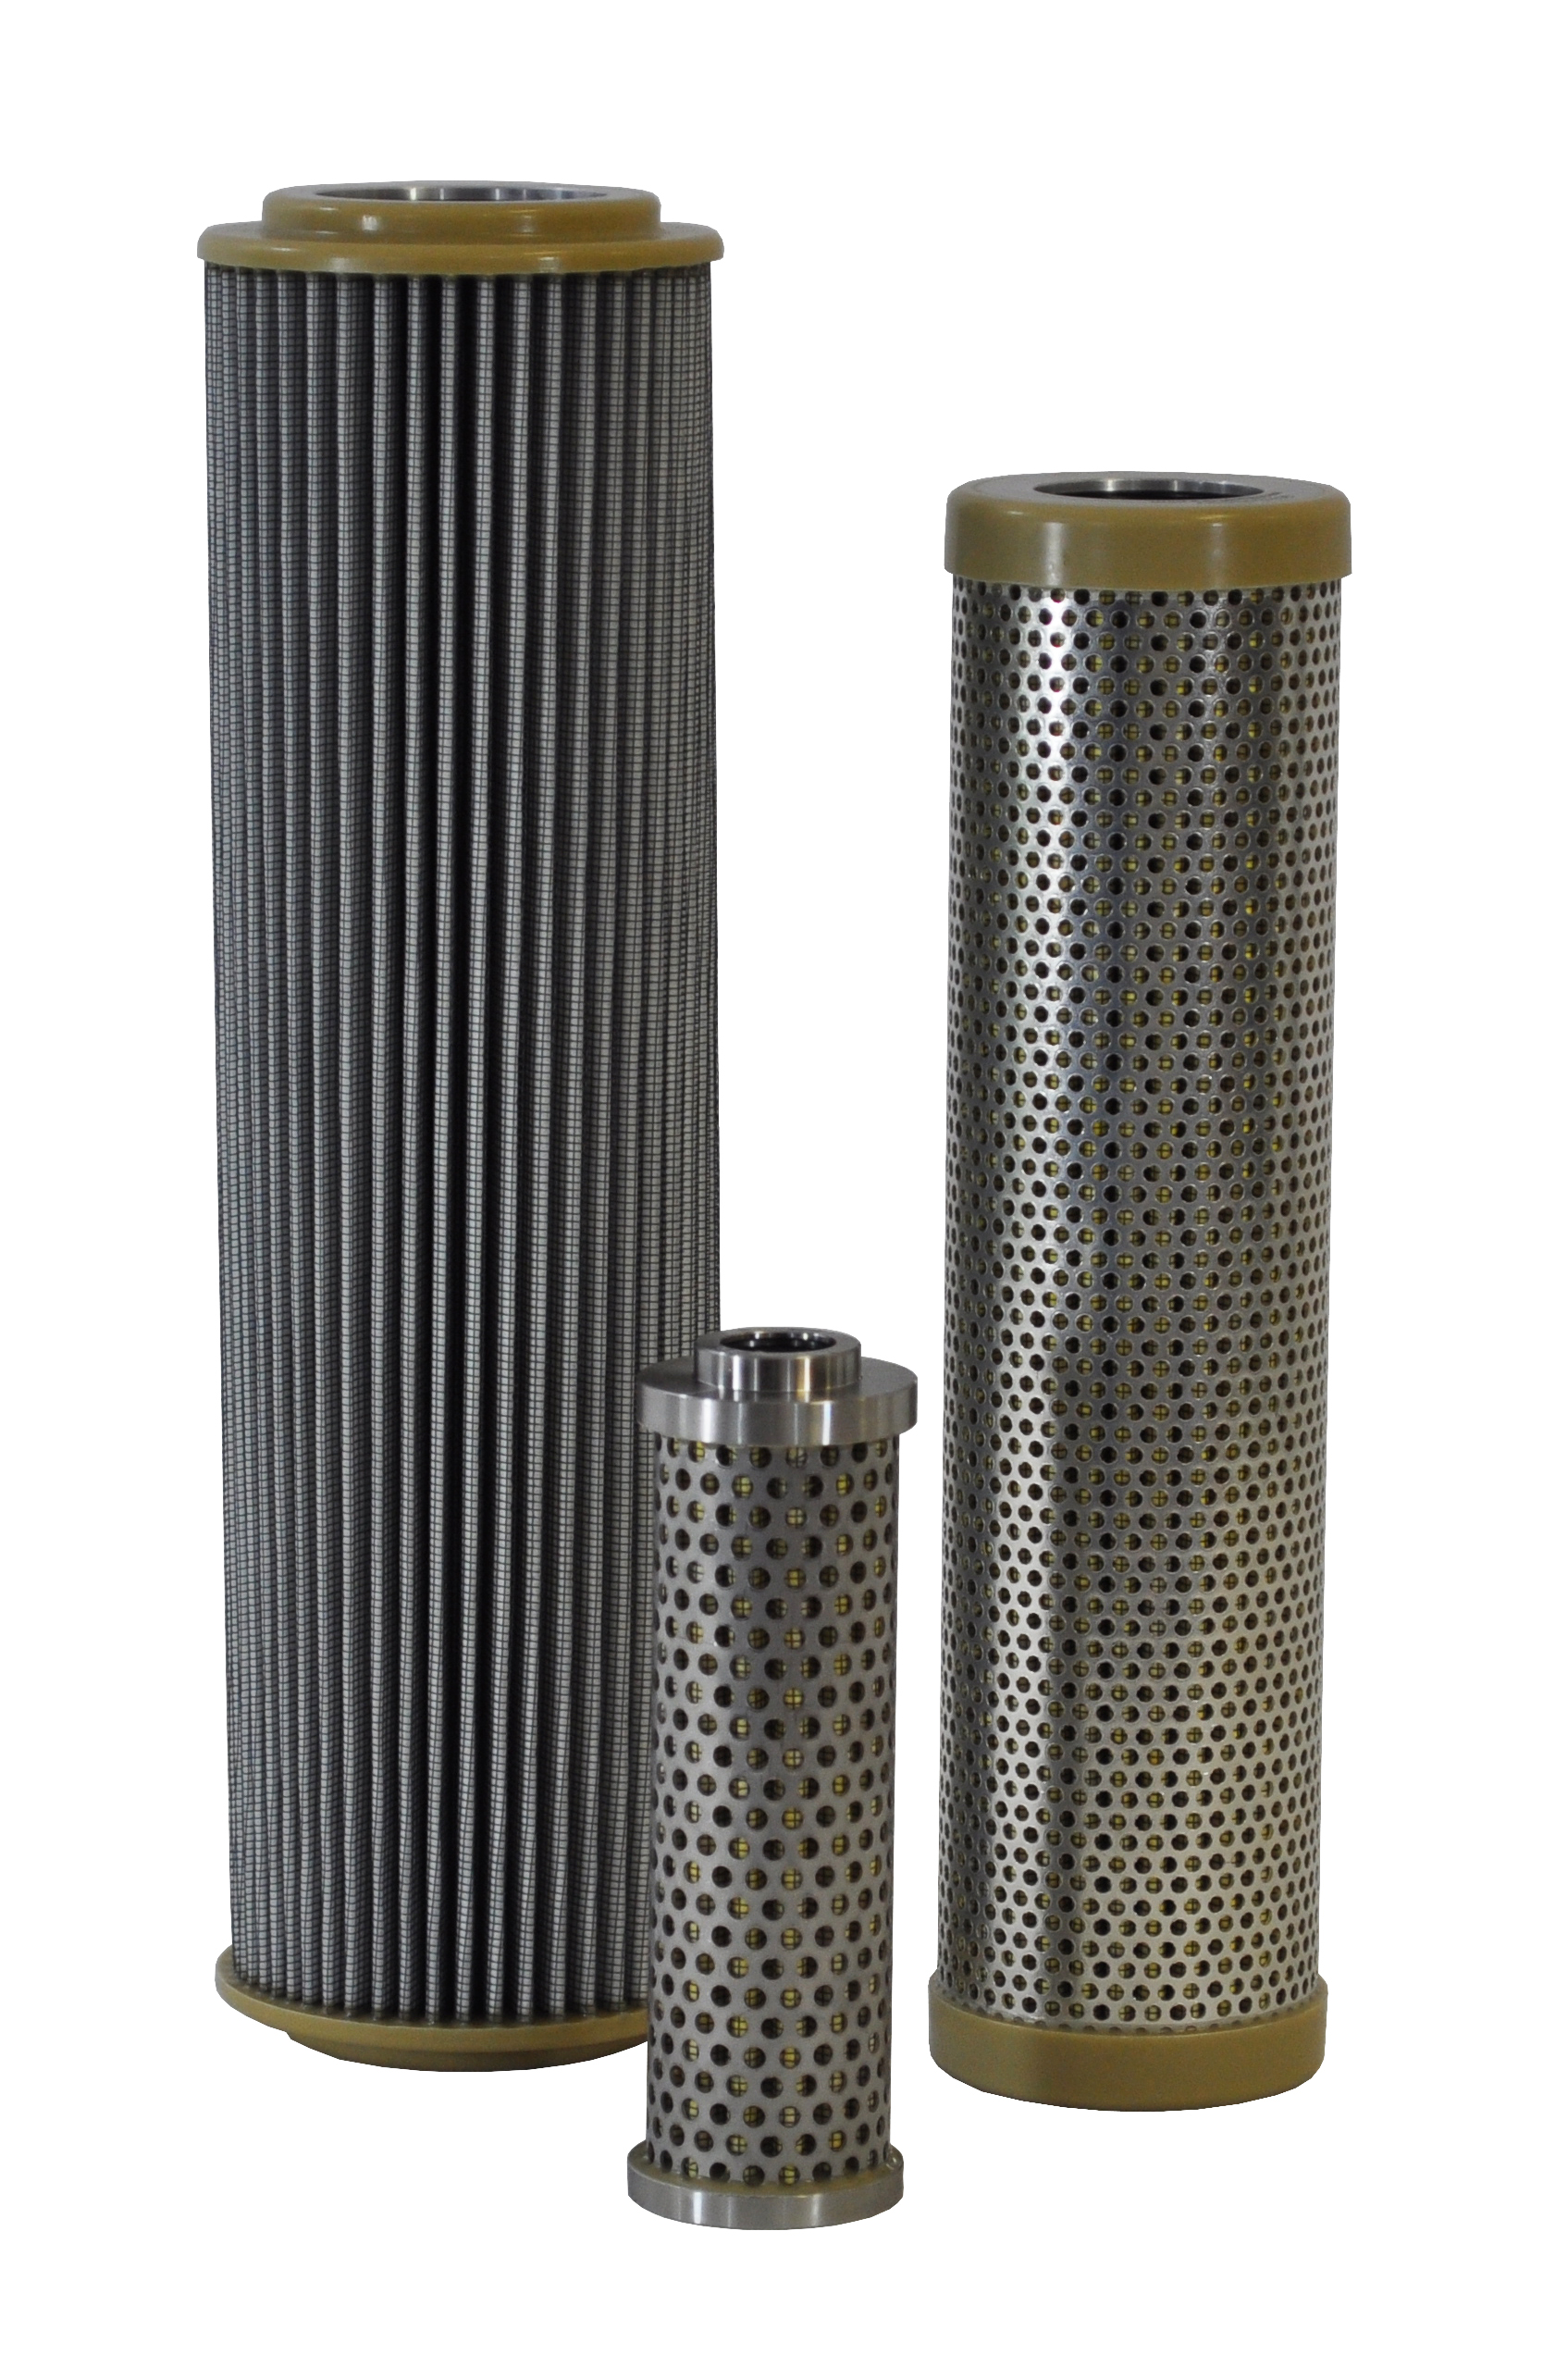 Filter and Cartridges